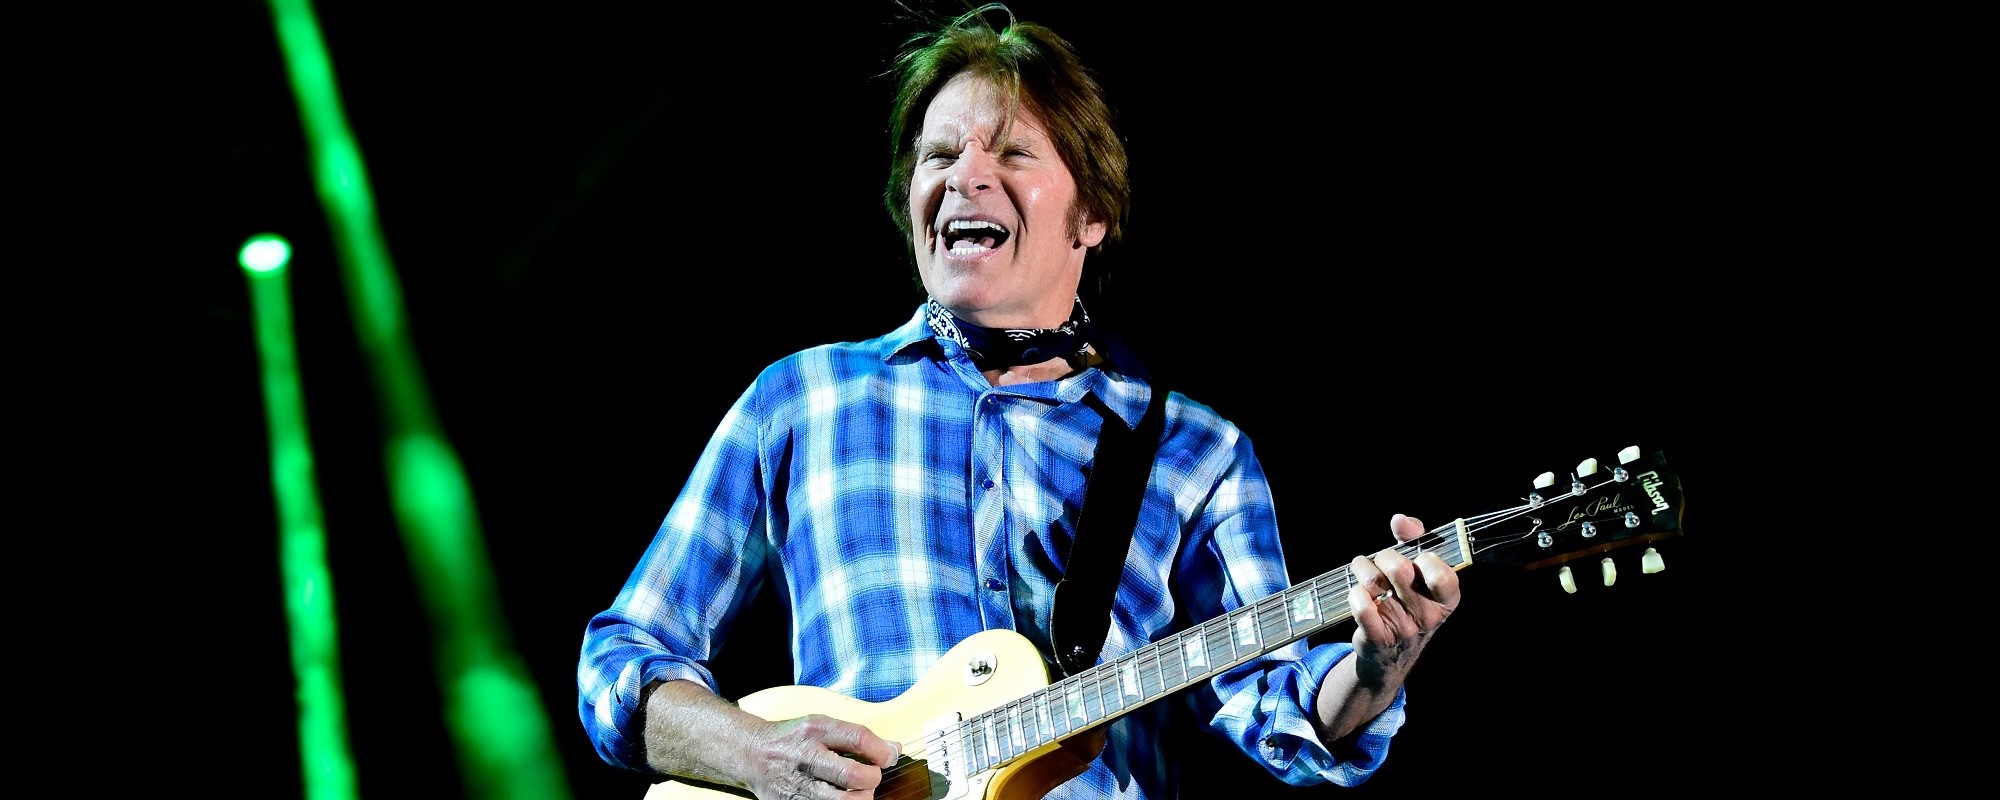 John Fogerty Recalls the “Euphoric” Feeling He Got from Writing “Proud Mary” and Other Classics Creedence Songs